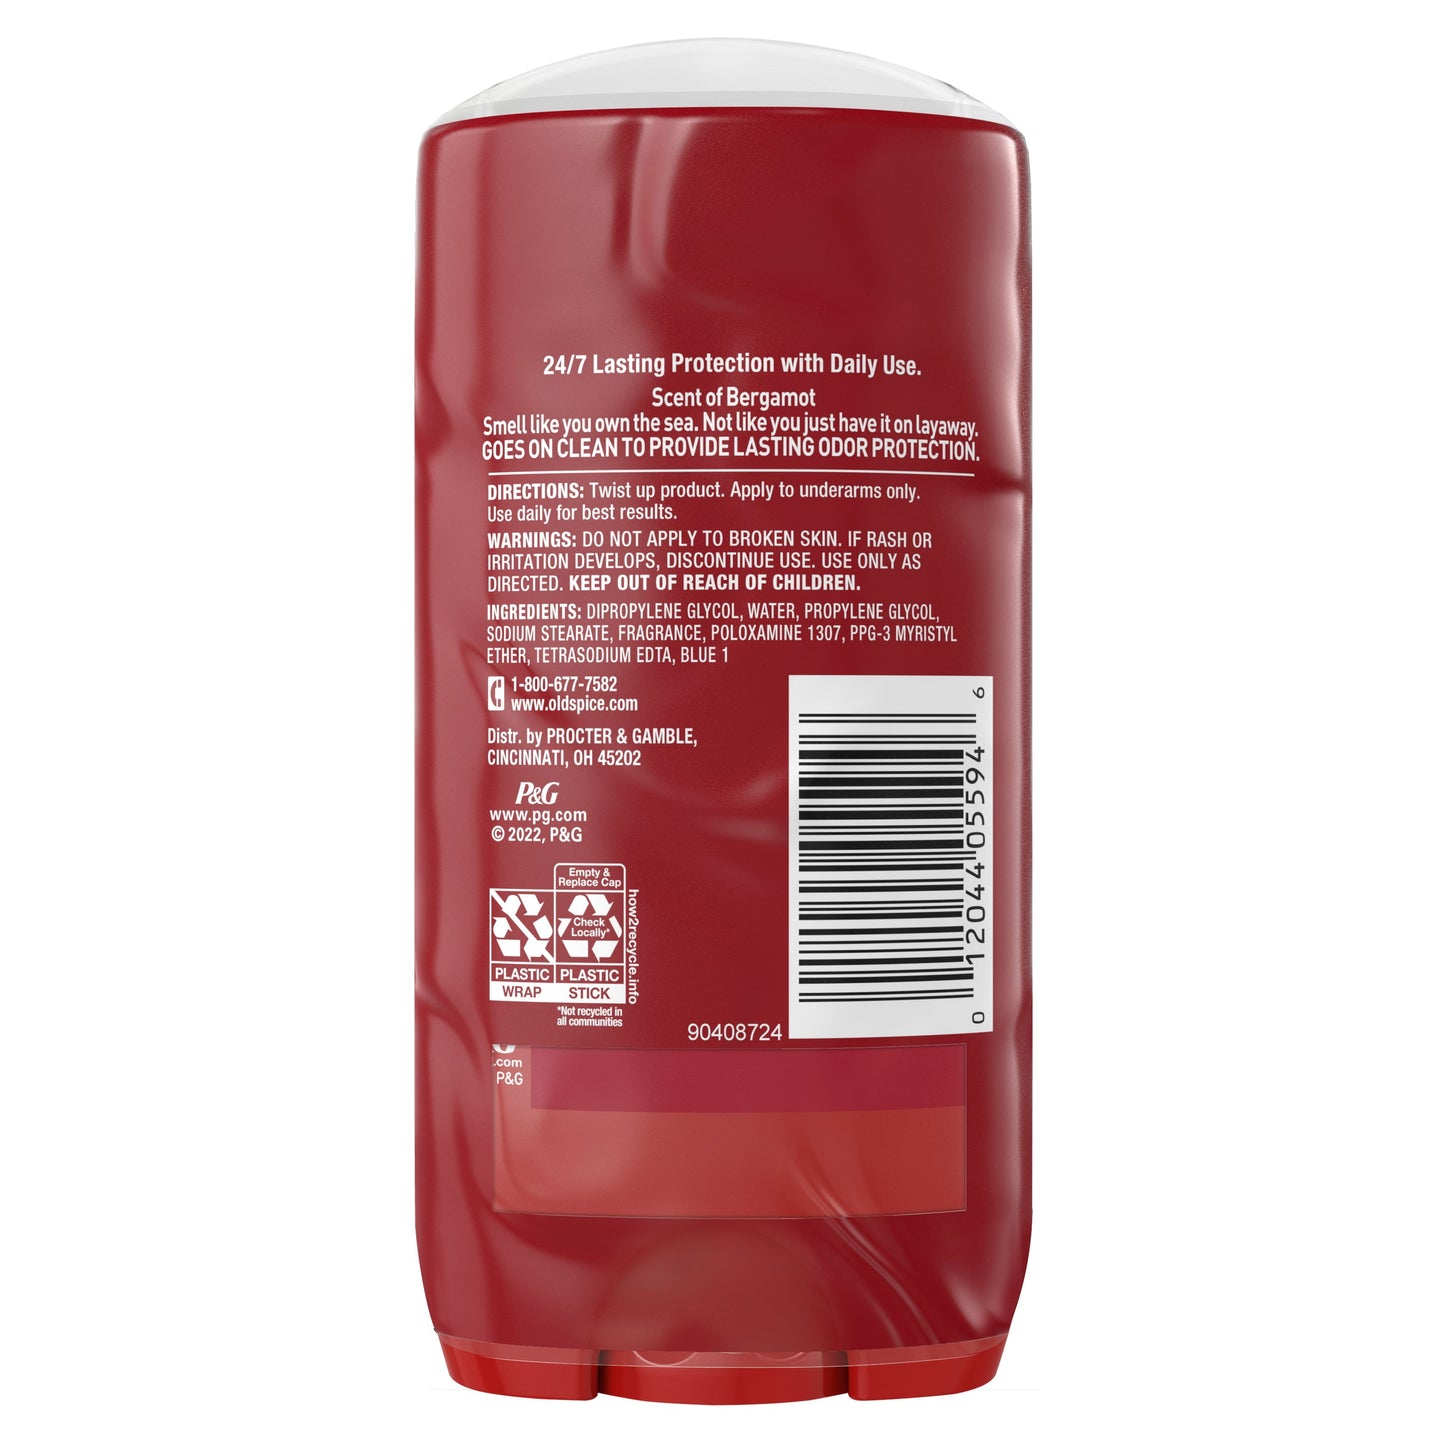 Old Spice Red Collection Deodorant Stick for Men, Captain Scent, 3.0 oz, Twin Pack